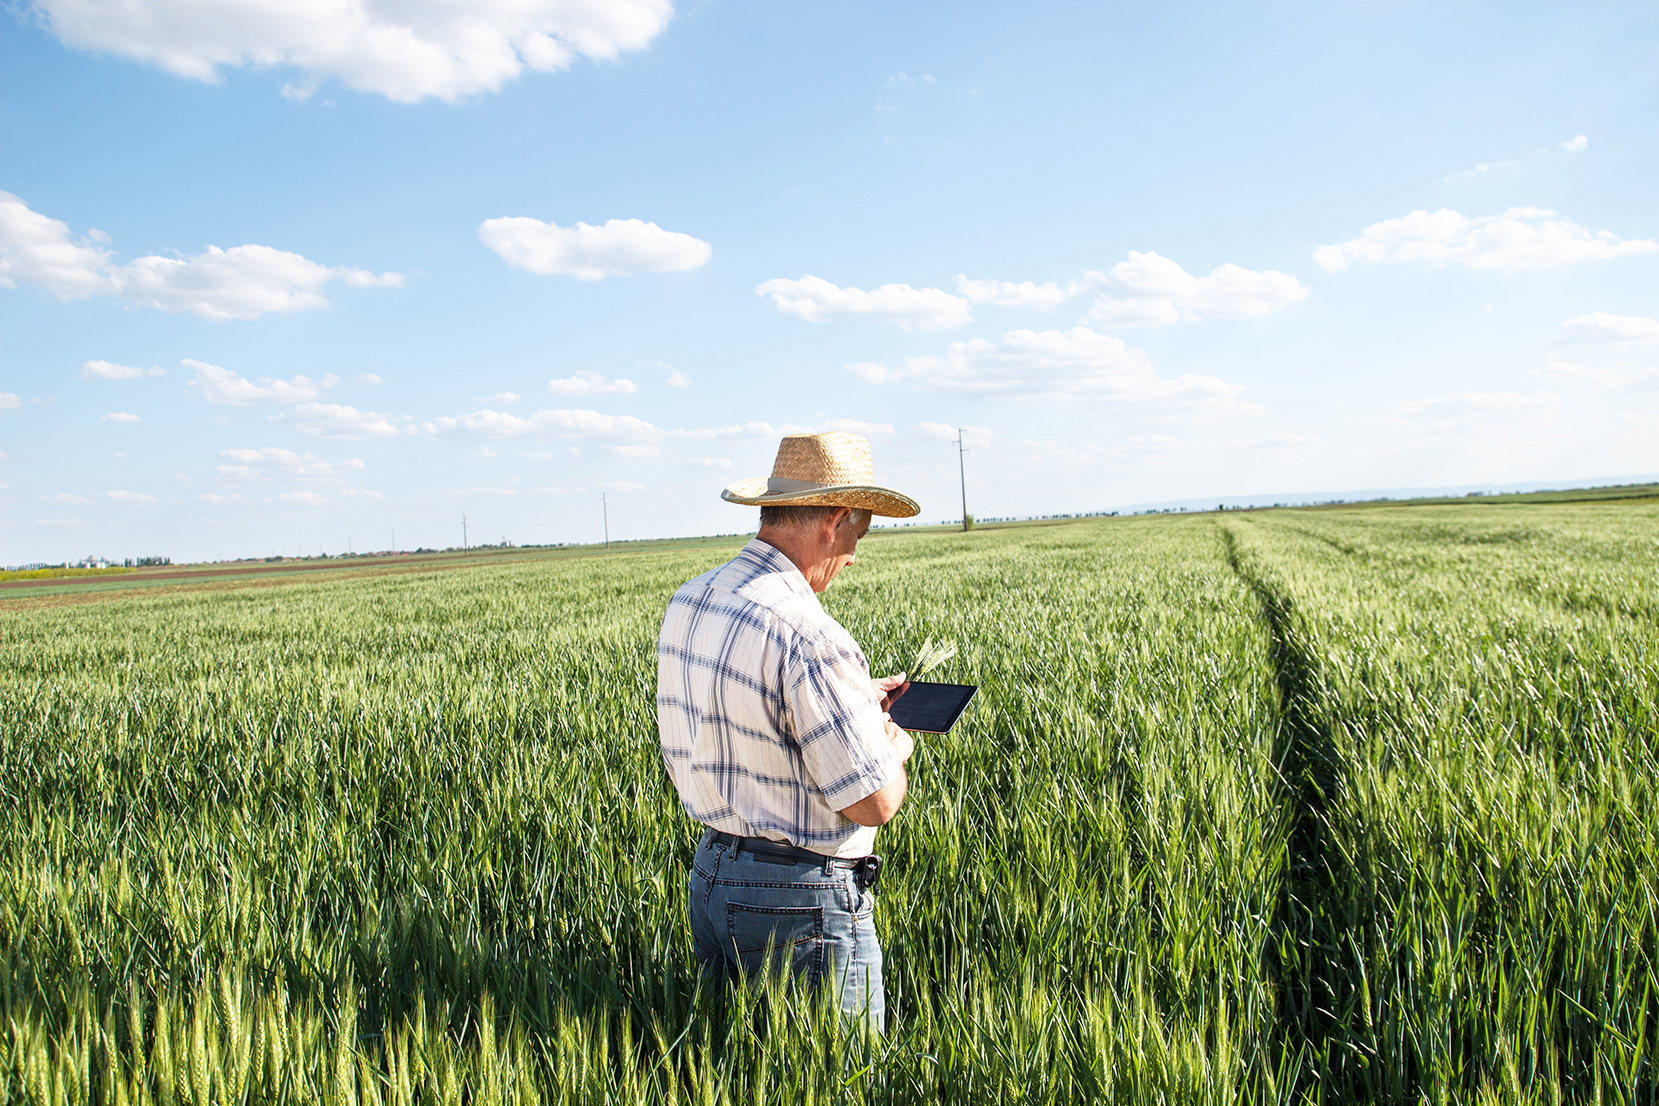 Farmers and insurers must constantly adapt to an ever-changing industry.